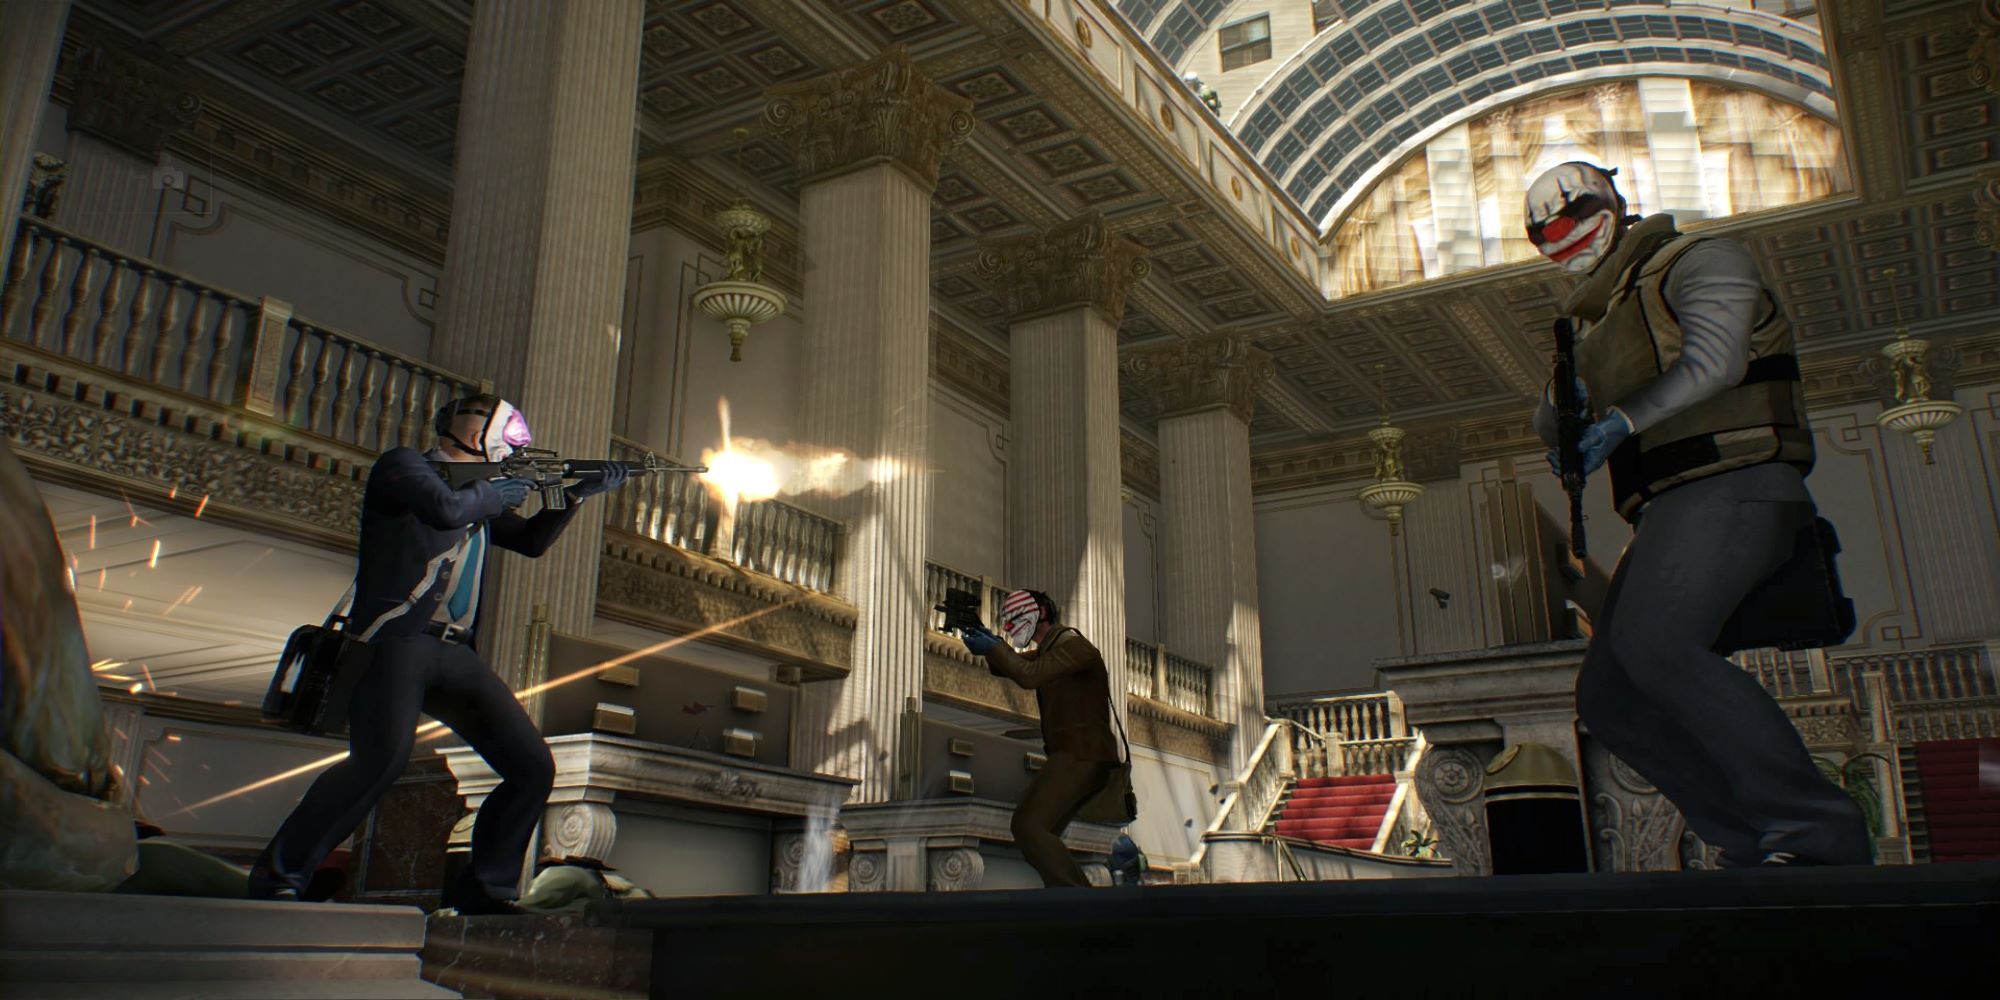 Players securing a bank during a heist in Payday 2.